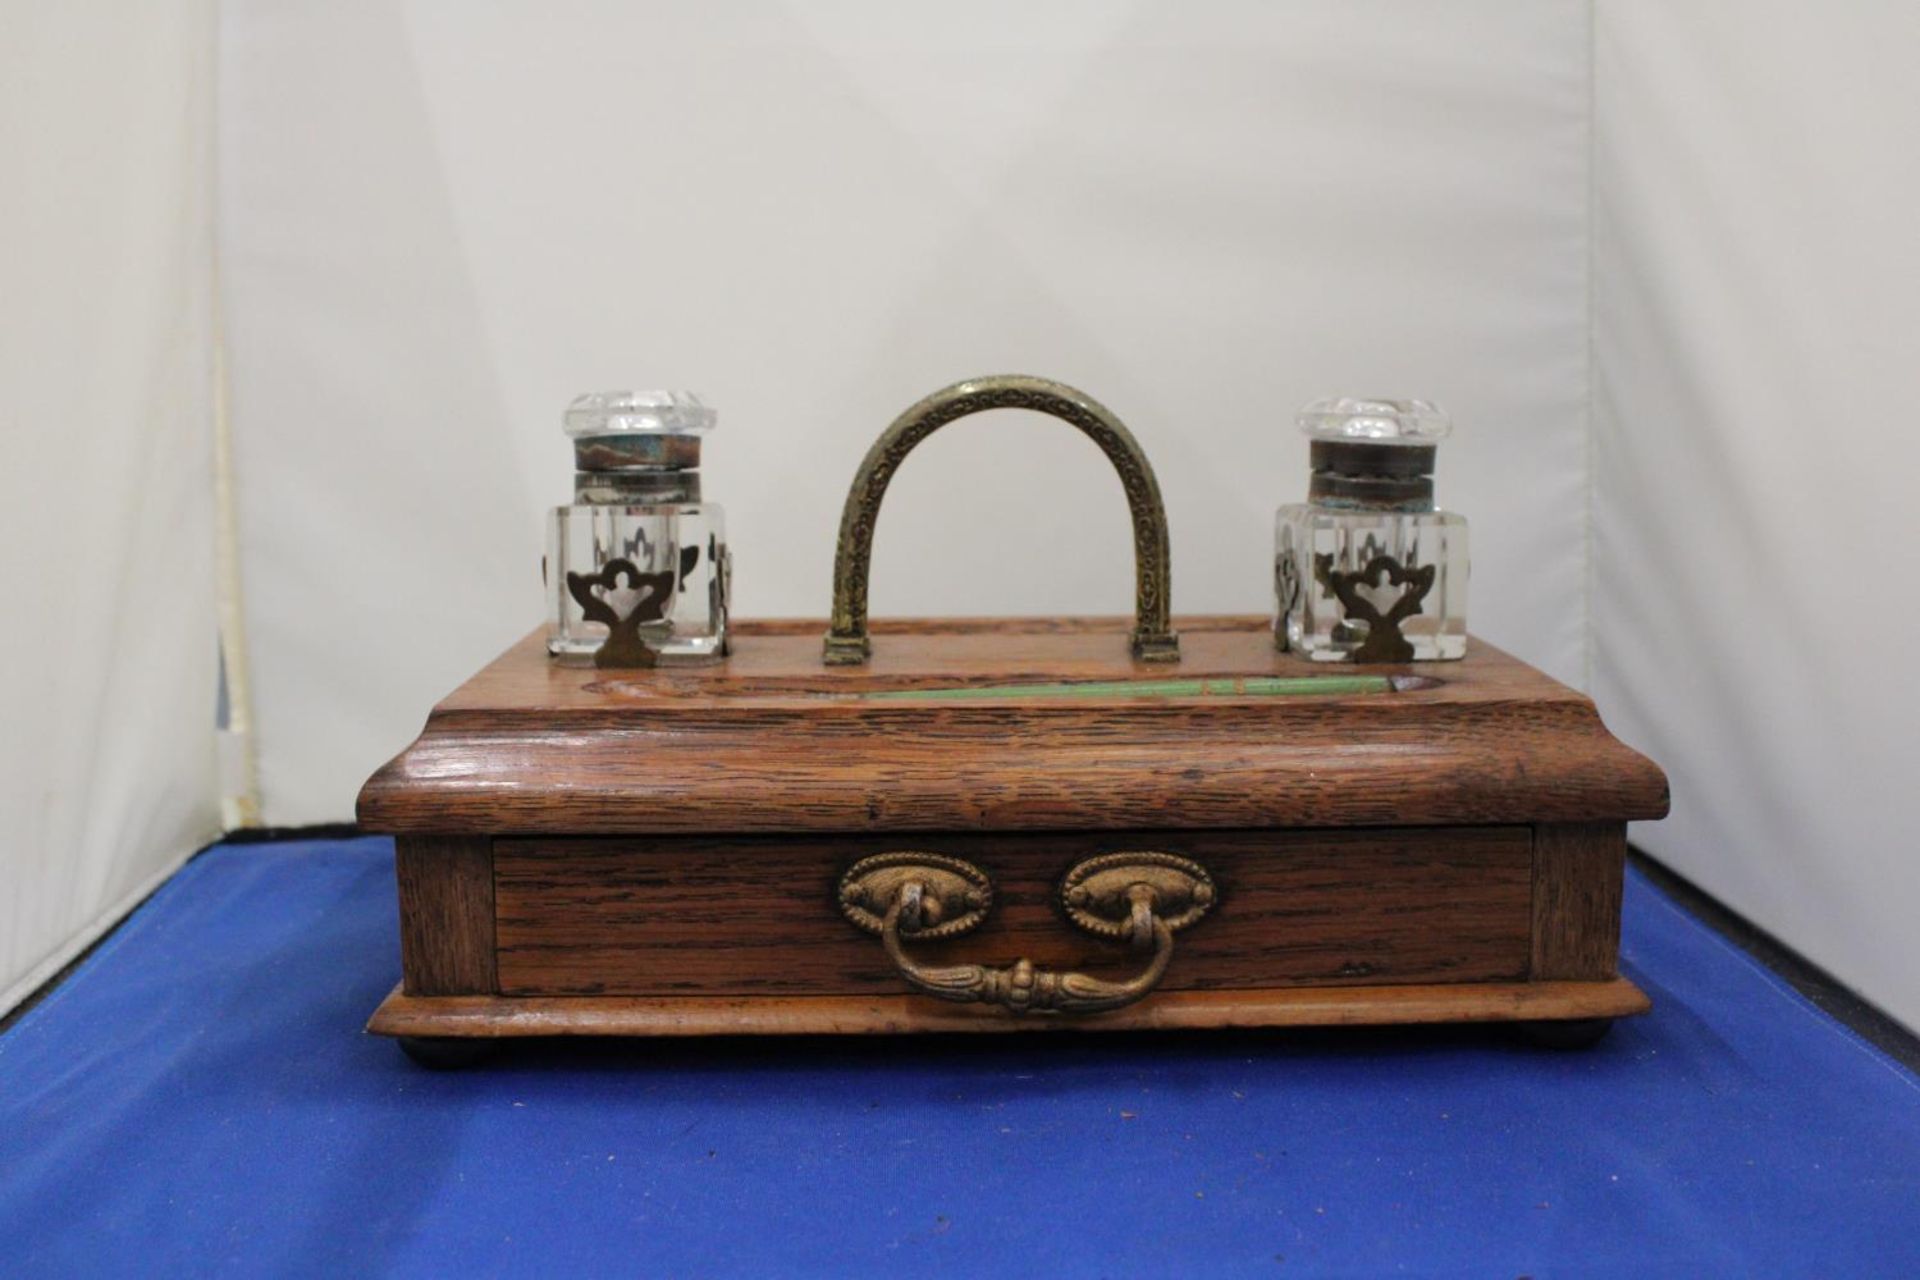 AN OAK INK WELL DESK SET WITH TWO GLASS BOTTLES, PEN AND DRAWER